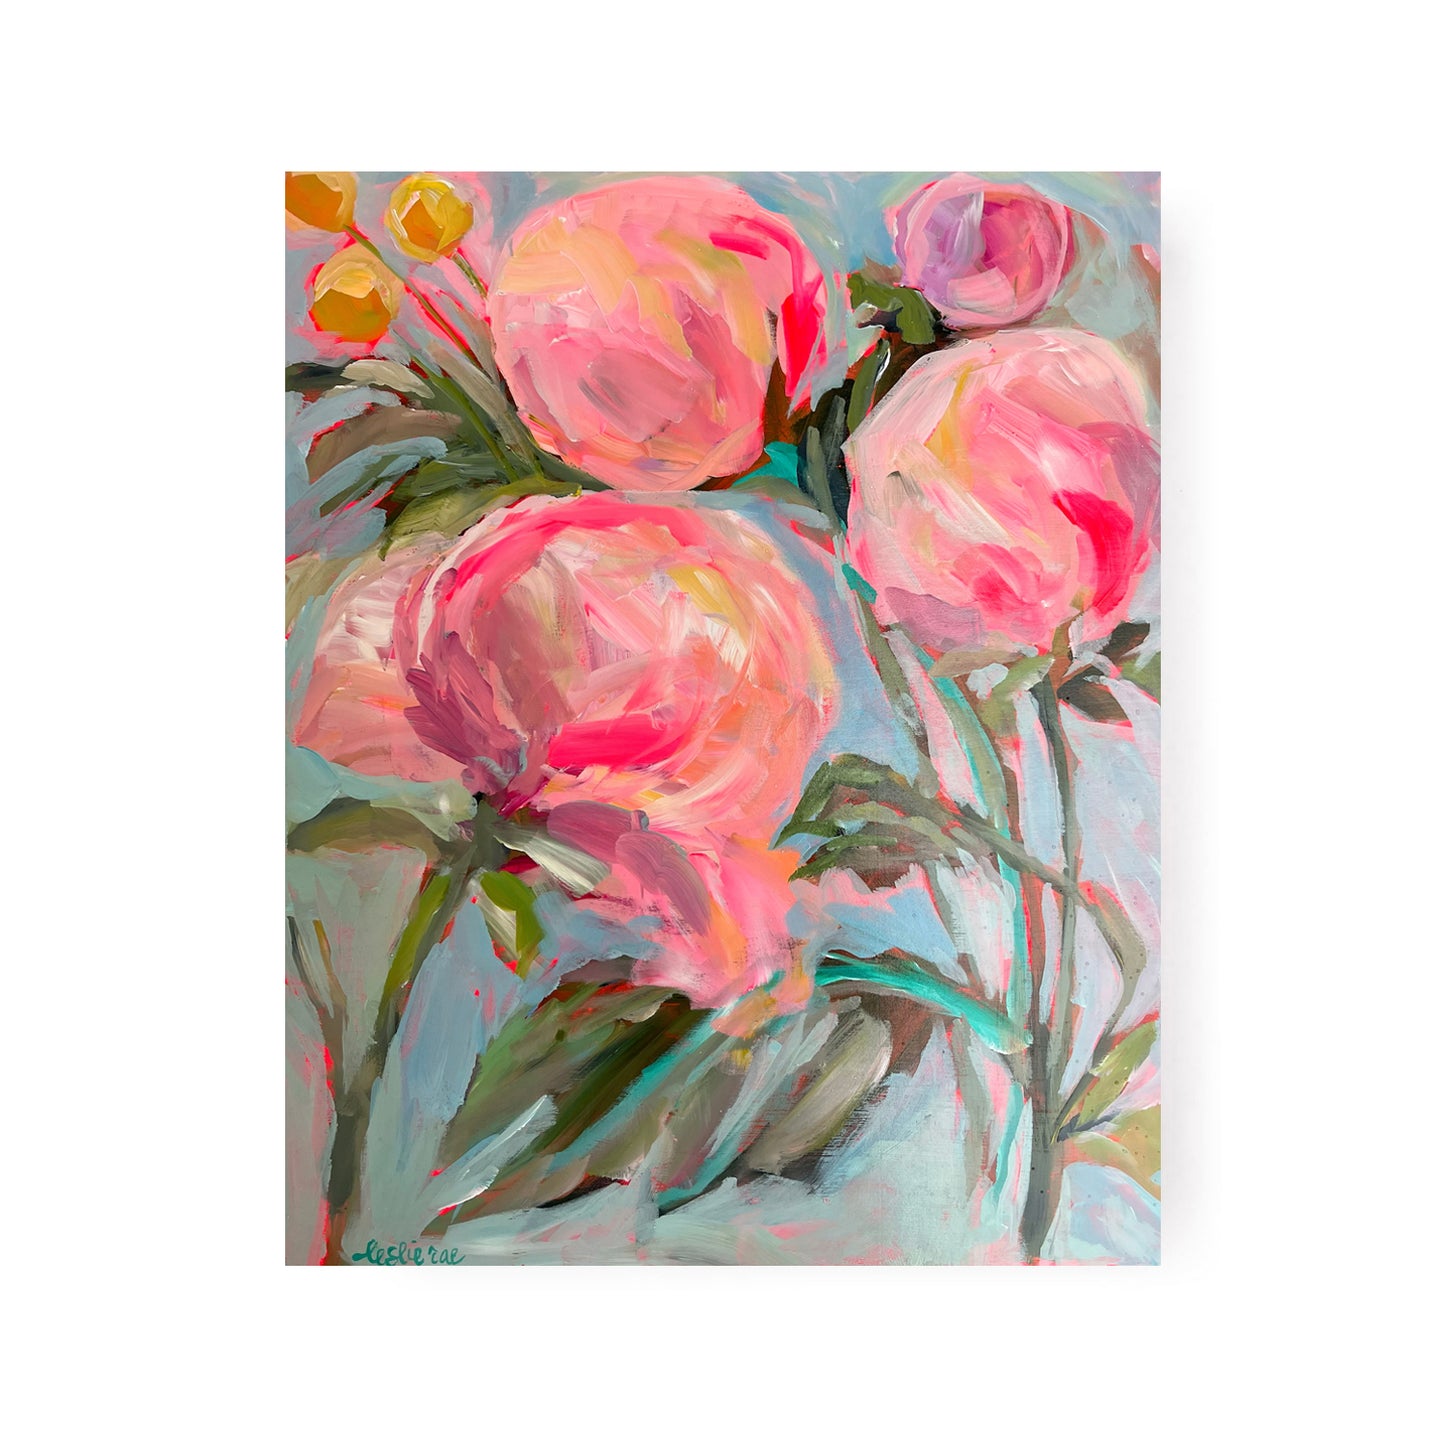 Peonies in the Back by Leslie Cannon